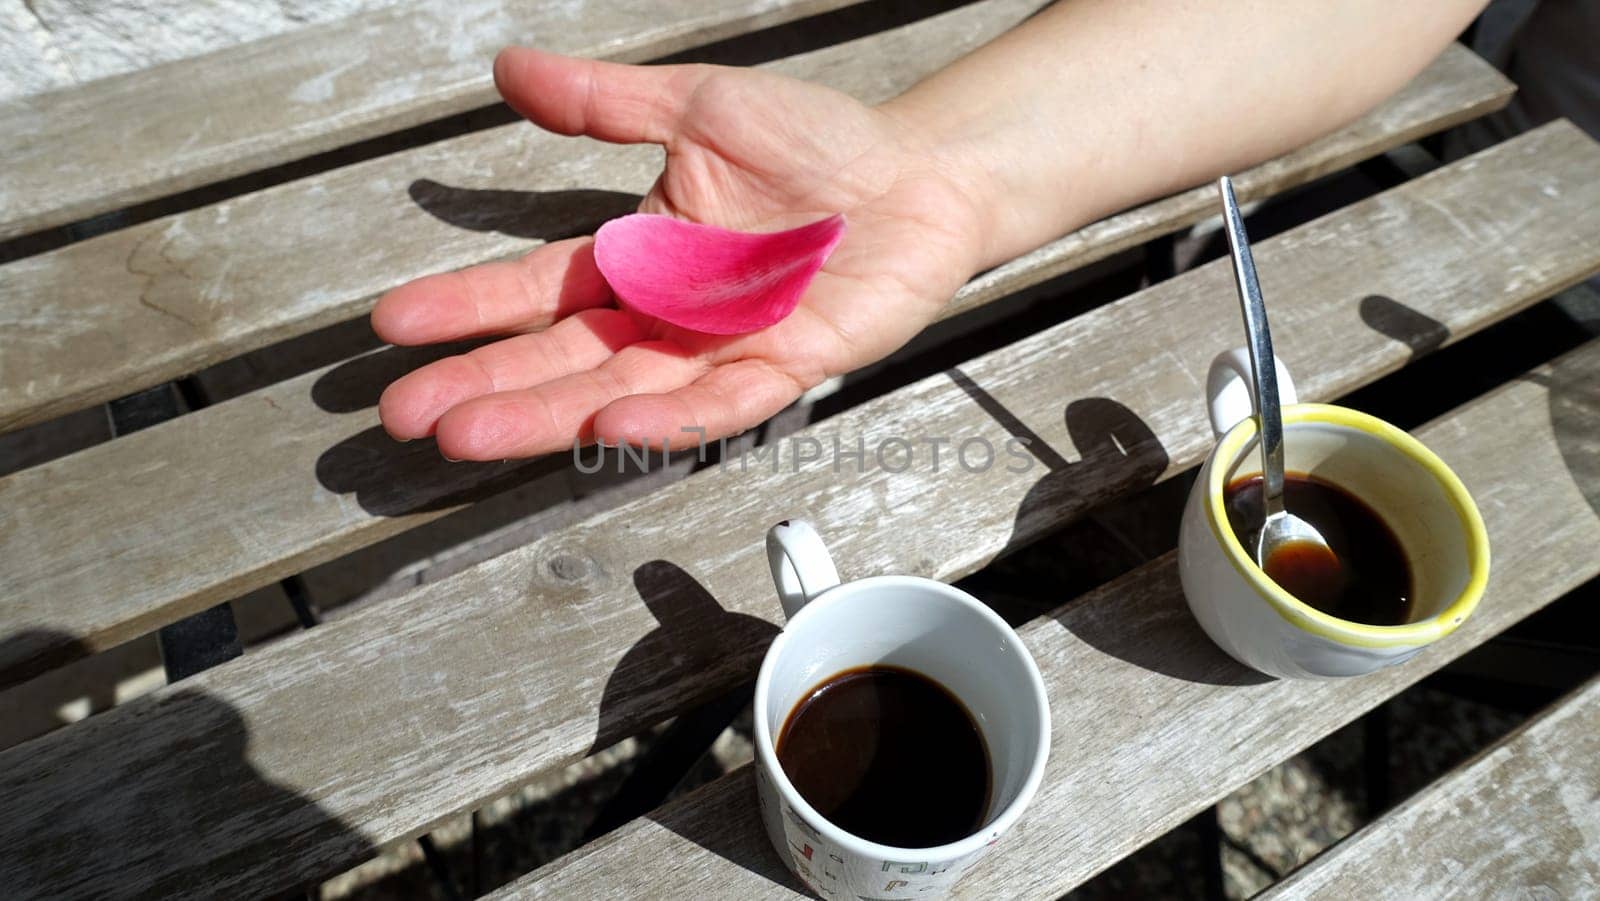 A petal of a freshly fallen pink flower resting in the palm of a hand and two cups of hot coffee.